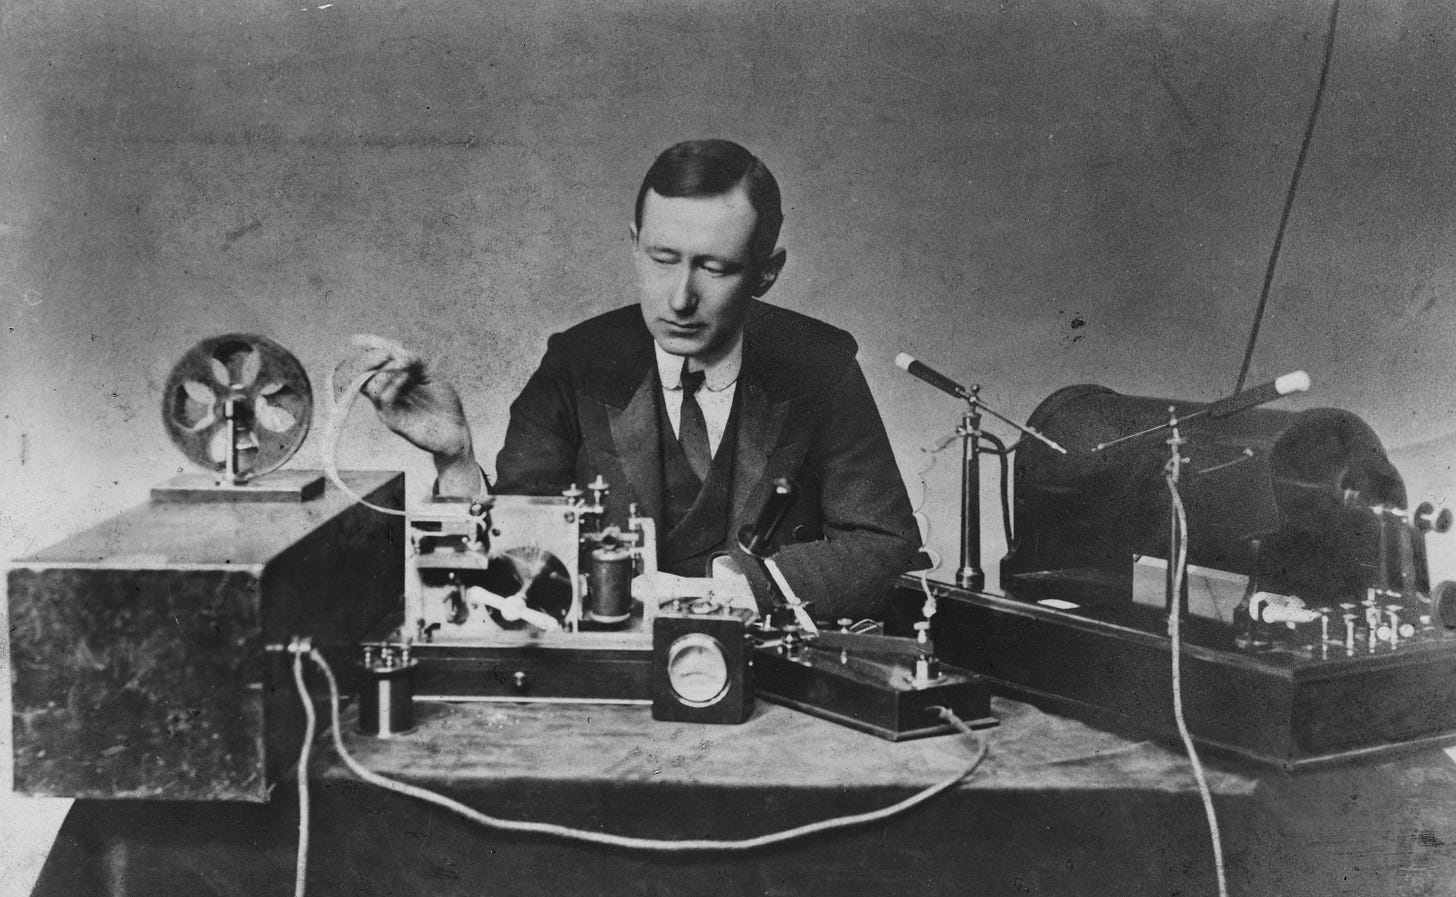 Black and white photo of a man next to a steampunkish early radio.